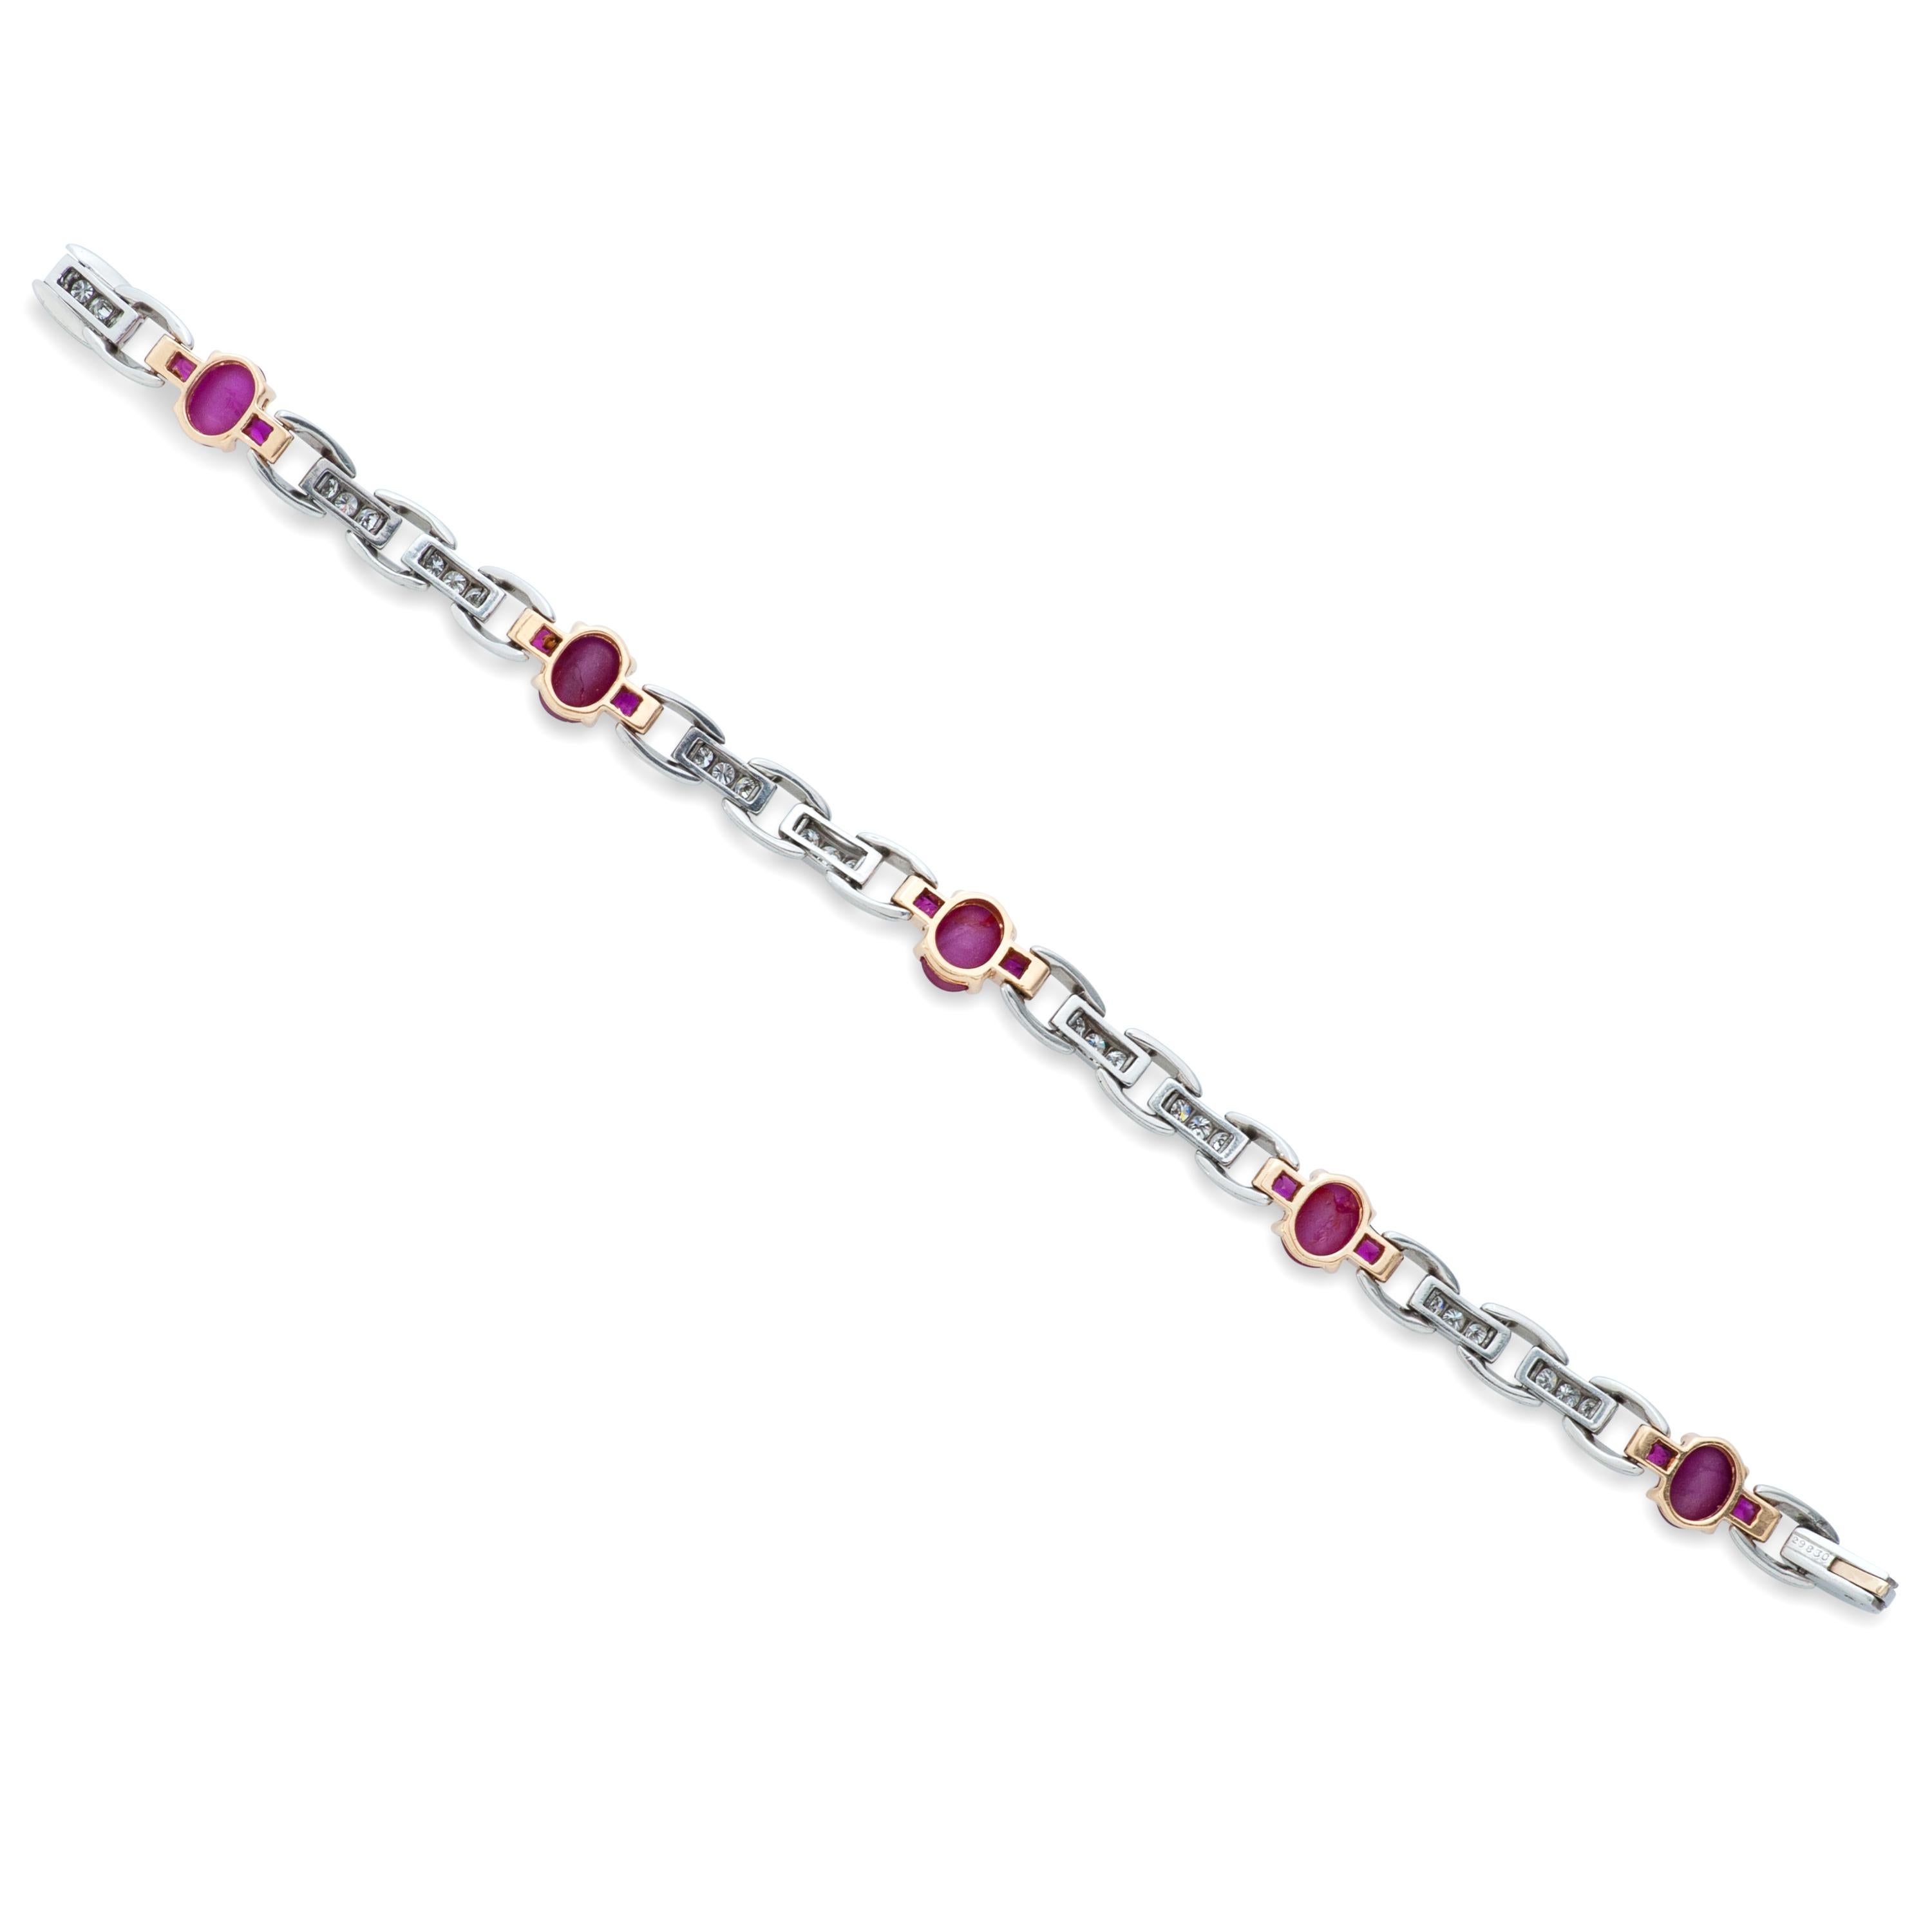 Oscar Heyman platinum and 18k yellow gold cabochon star ruby and diamond bracelet.  5 oval cabochon star rubies weighing approximately 6.25 carats are accented with 10 baguette rubies weighing 1.20ct and 30 round diamonds weighing 1.00 carat with G